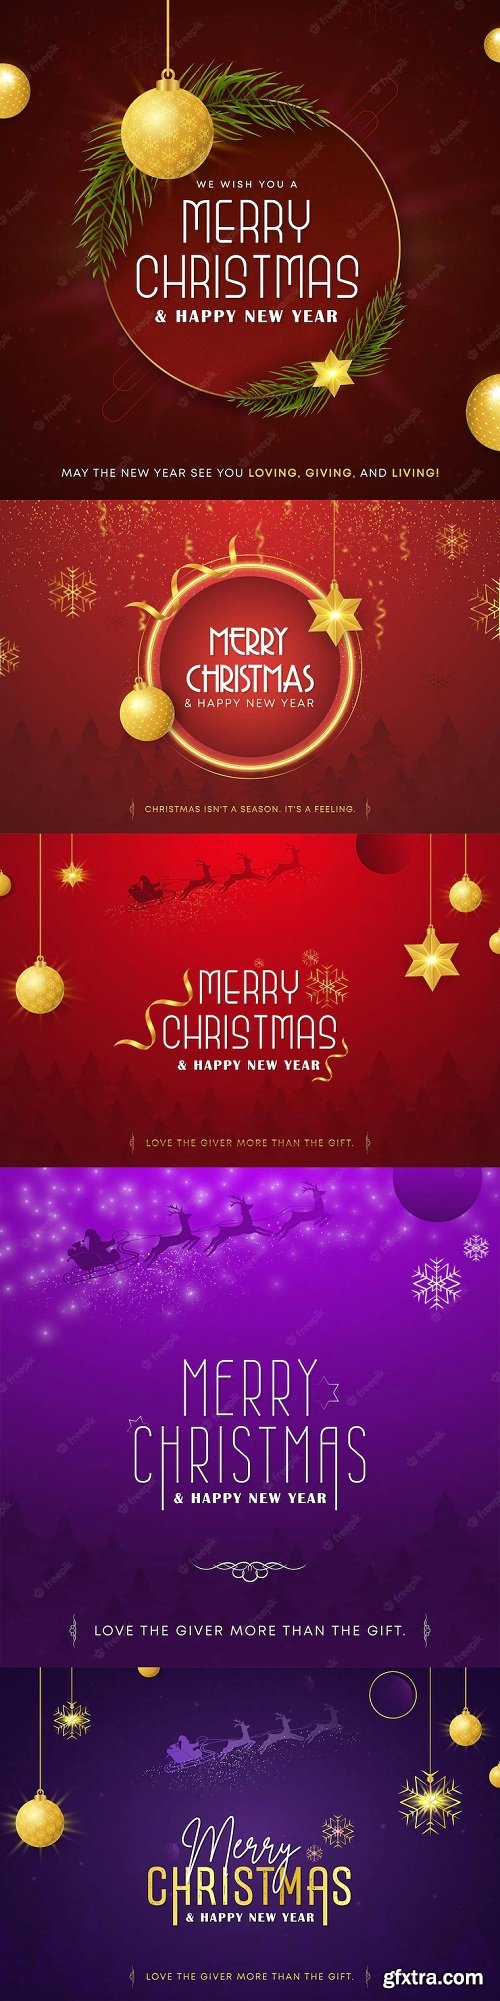 Modern merry christmas post design with luxury background